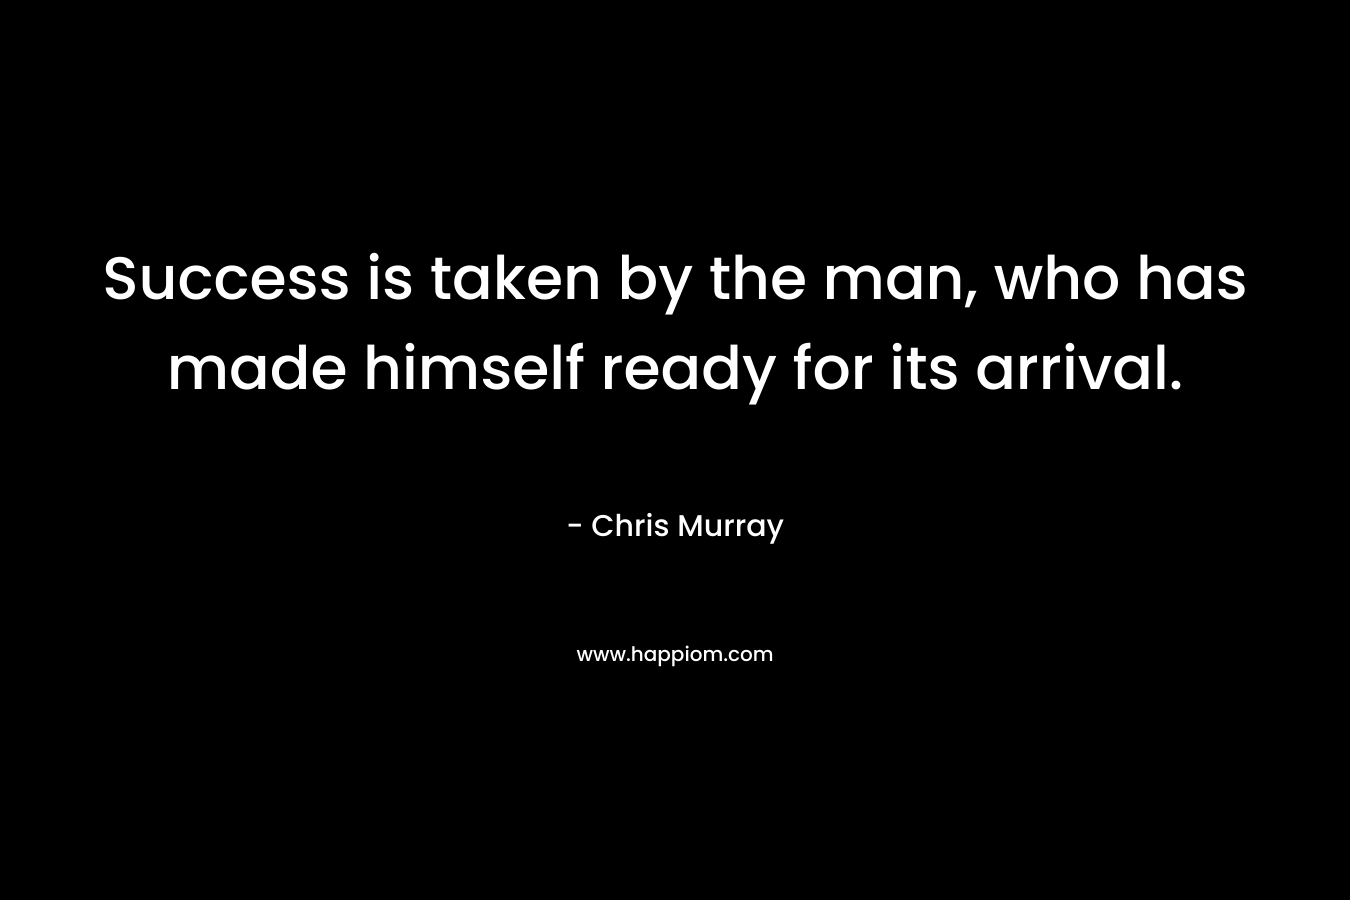 Success is taken by the man, who has made himself ready for its arrival. – Chris Murray